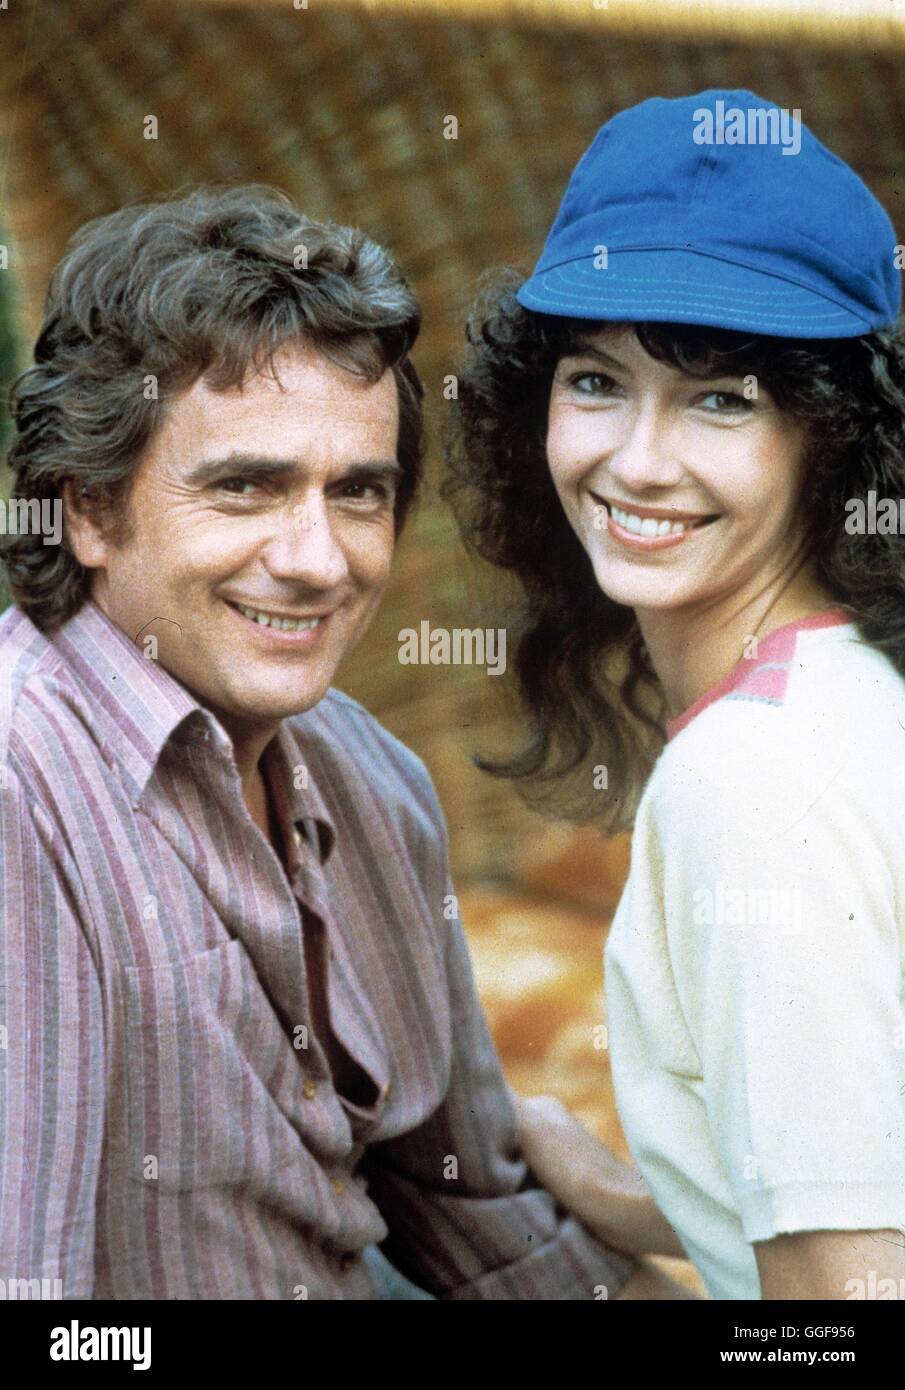 SO EIN THEATER UM DIE LIEBE / Romantic Comedy USA 1983 / Arthur Hiller DUDLEY MOORE, MARY STEENBURGEN in 'Romantic Comedy', 1983. Regie: Arthur Hiller aka. Romantic Comedy Stock Photo